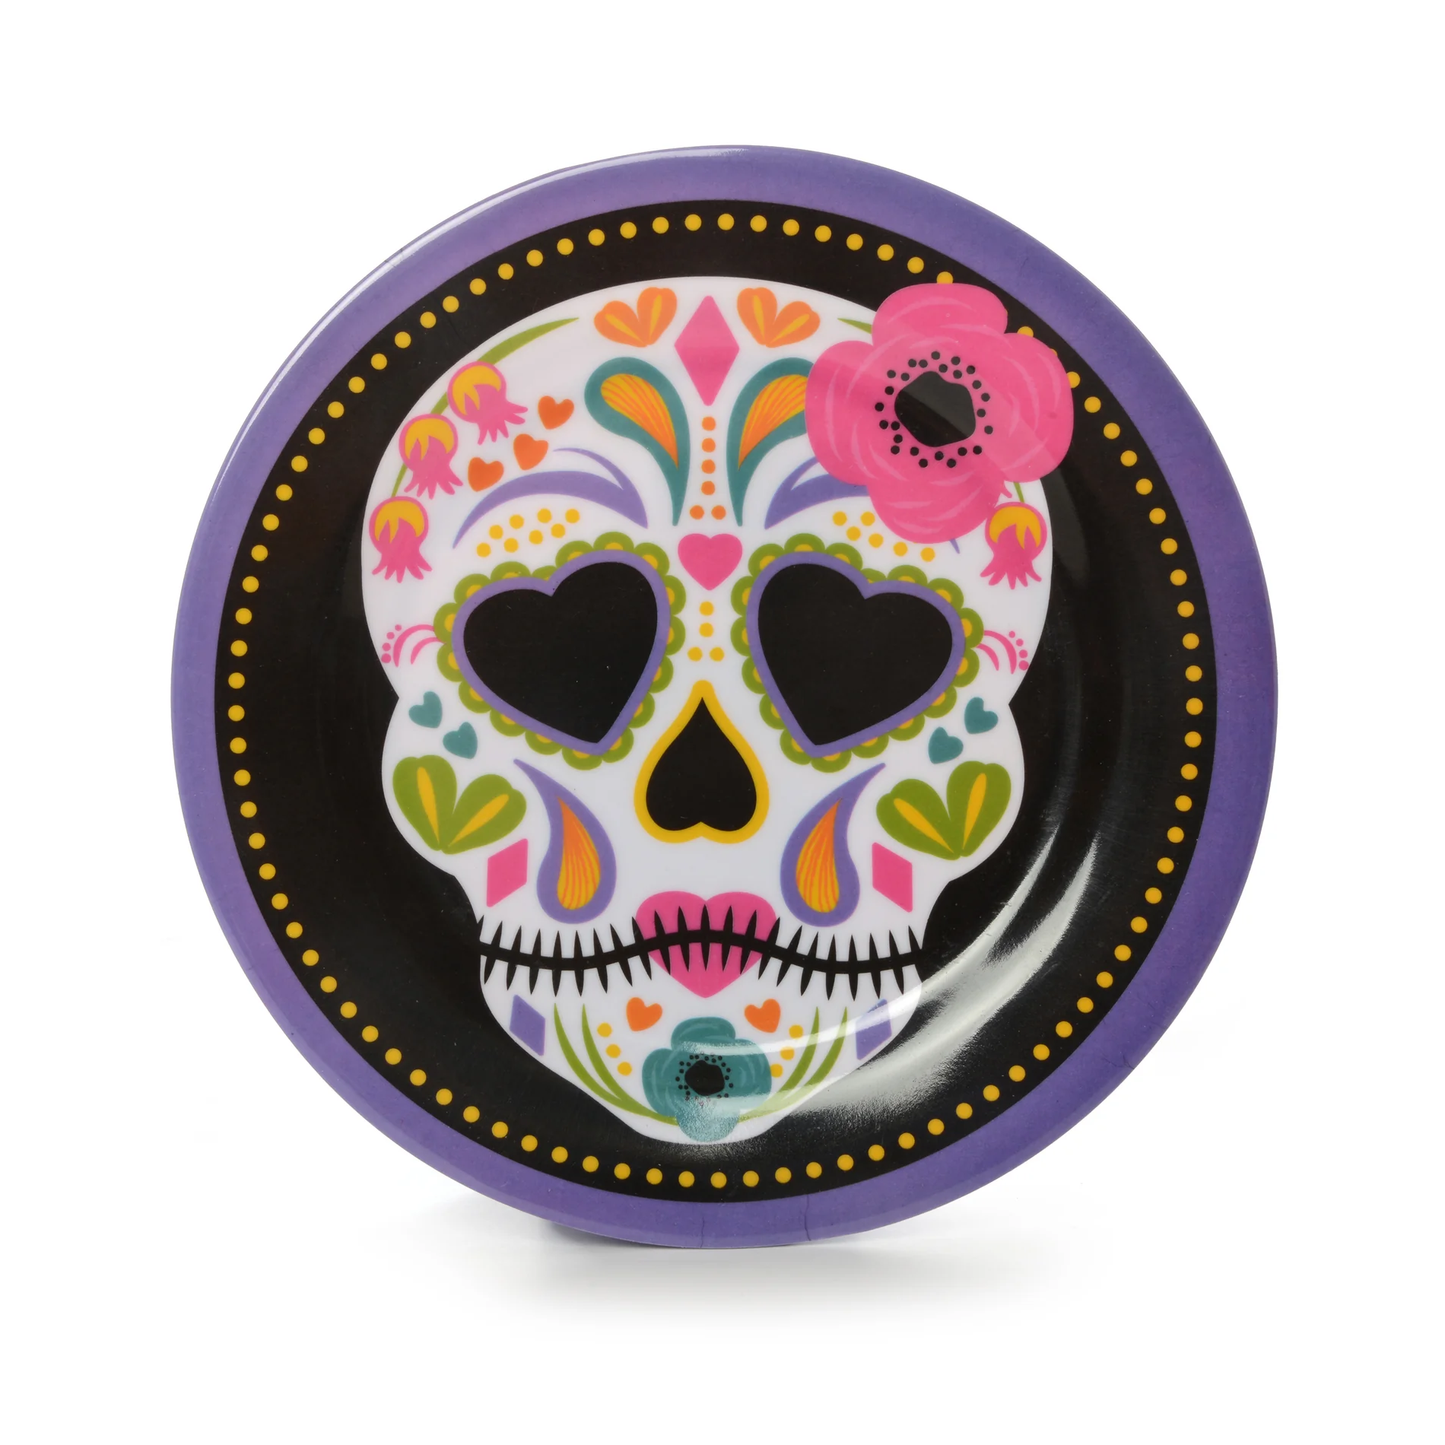 8in Melamine Salad Plate - Day Of The Dead